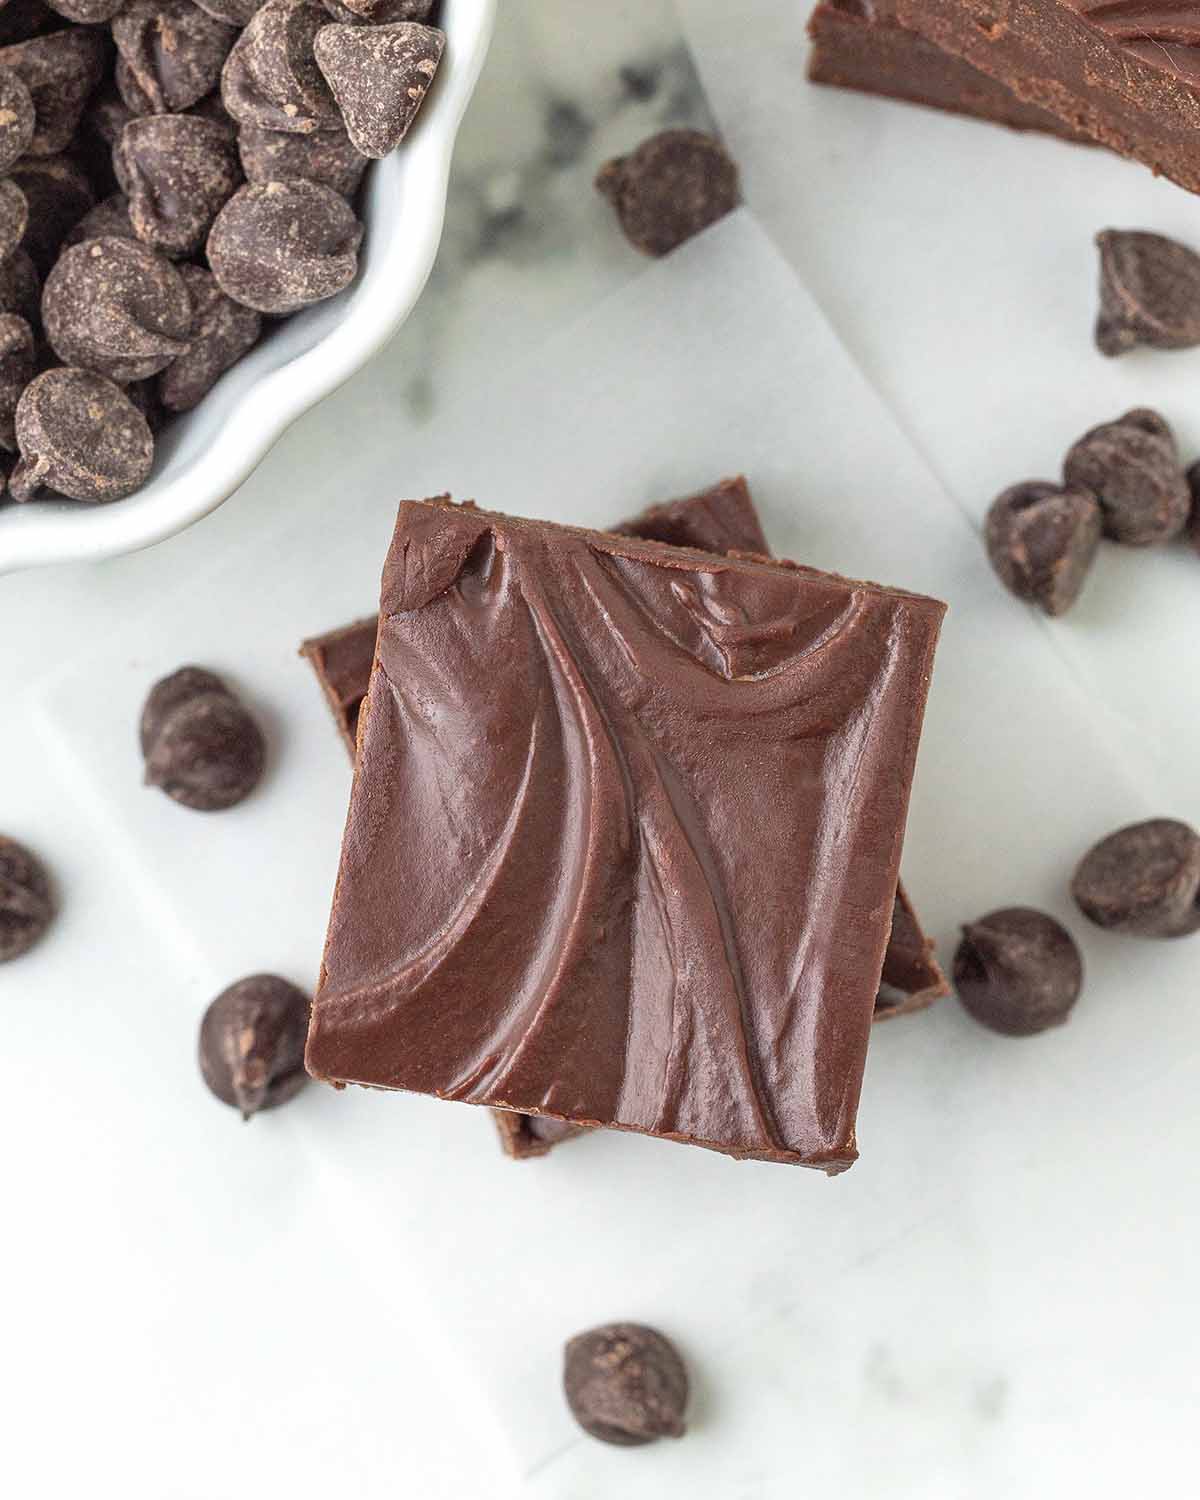 An overhead image showing two pieces of vegan fudge, chocolate chips surround the fudge.